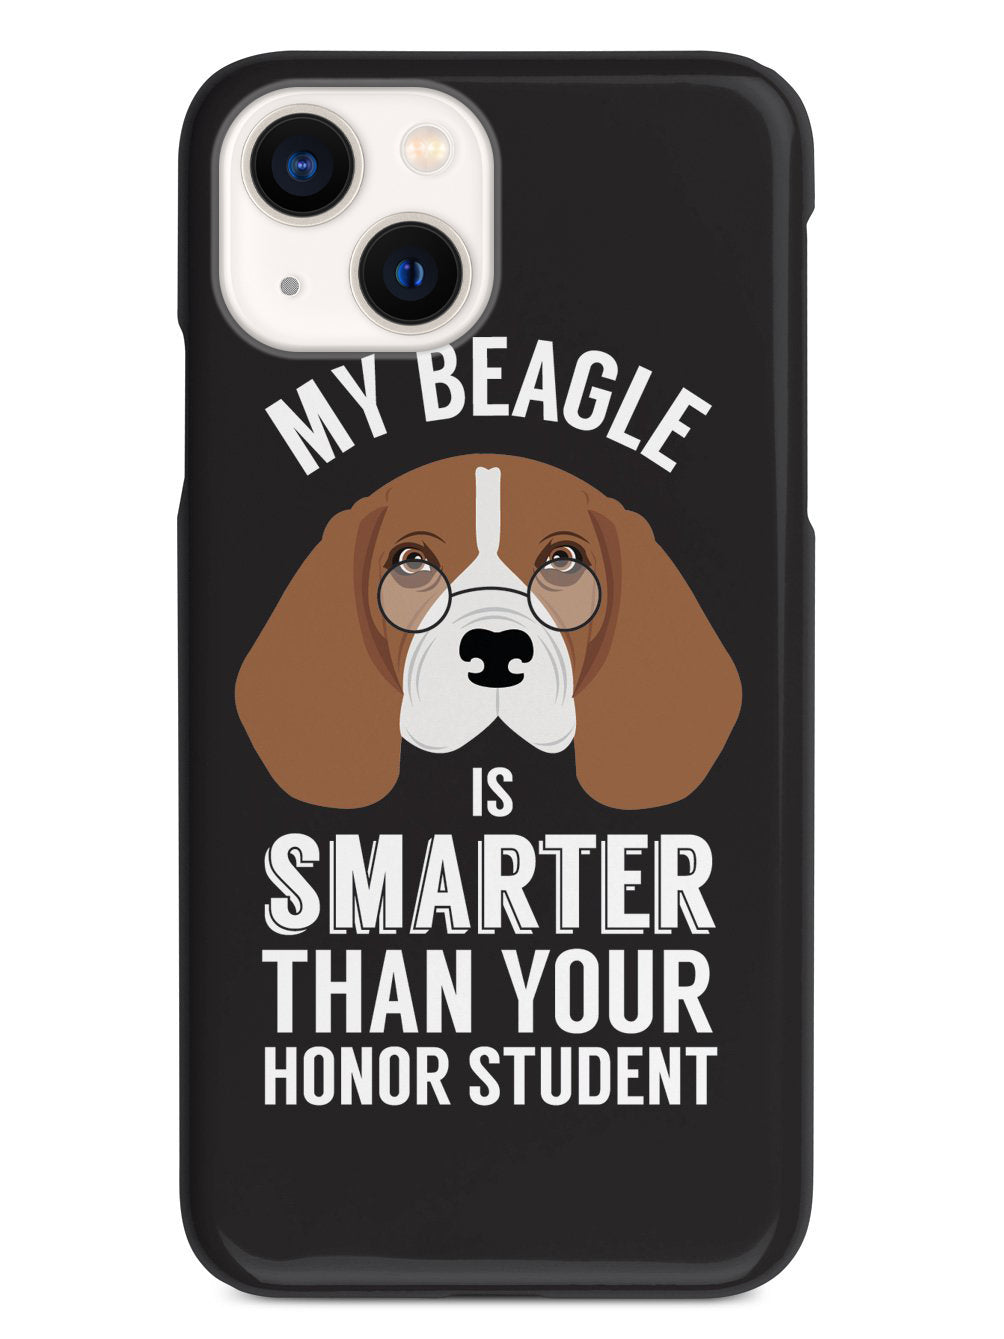 Smarter Than Your Honor Student - Beagle Case